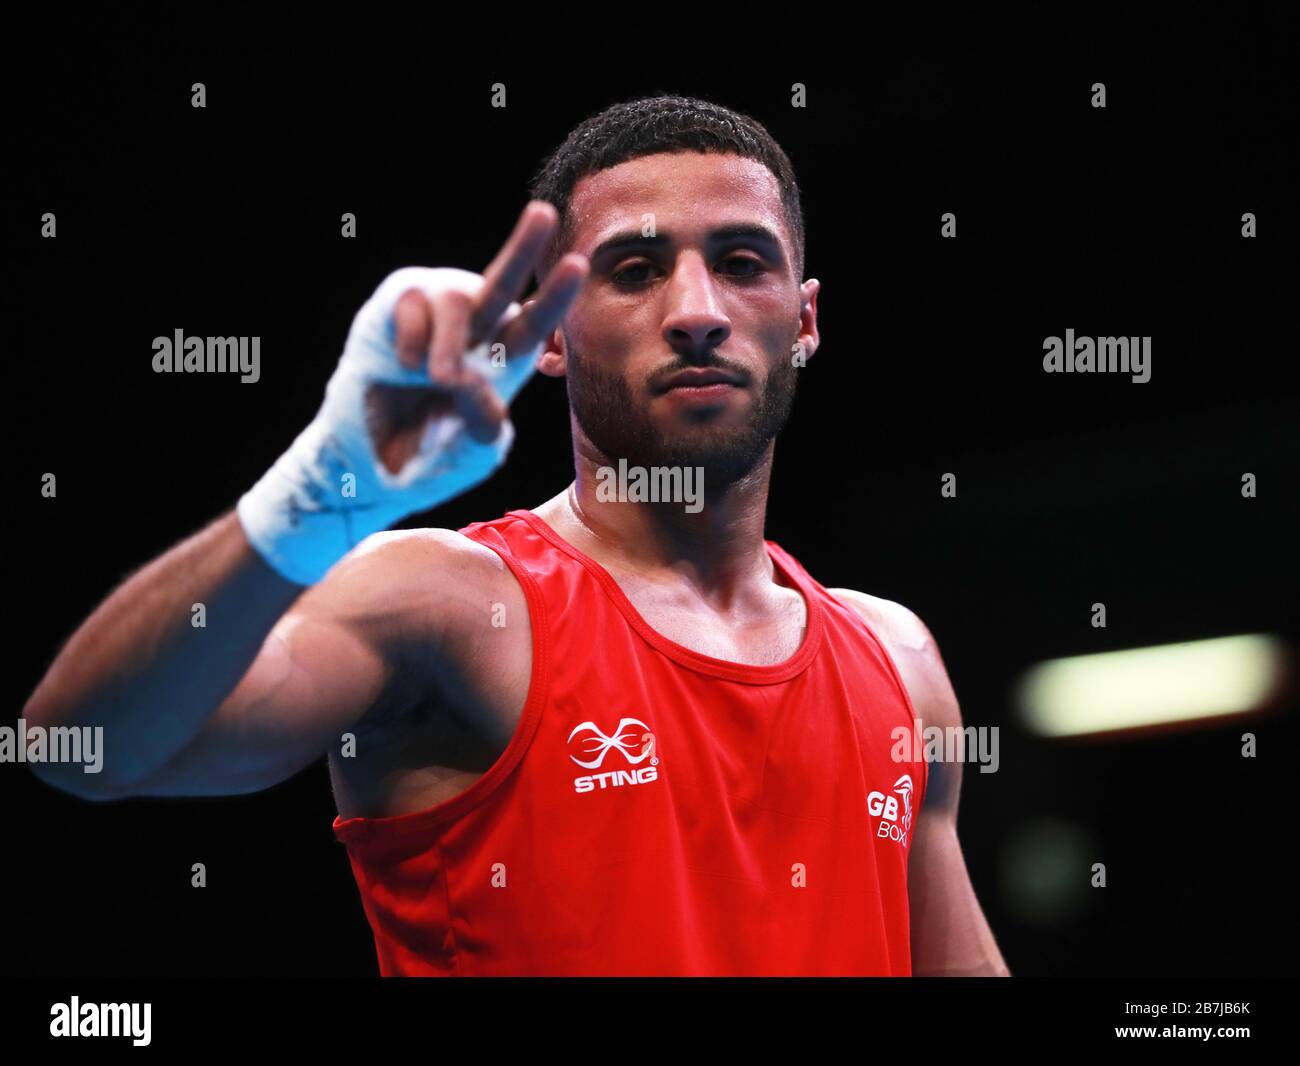 Great Britain's Galal Yafai celebrates his win to qualify for the Tokyo Olympics during day three of the Boxing Road to Tokyo 2020 Olympic qualifying event at the Copper Box Arena, London. Stock Photo